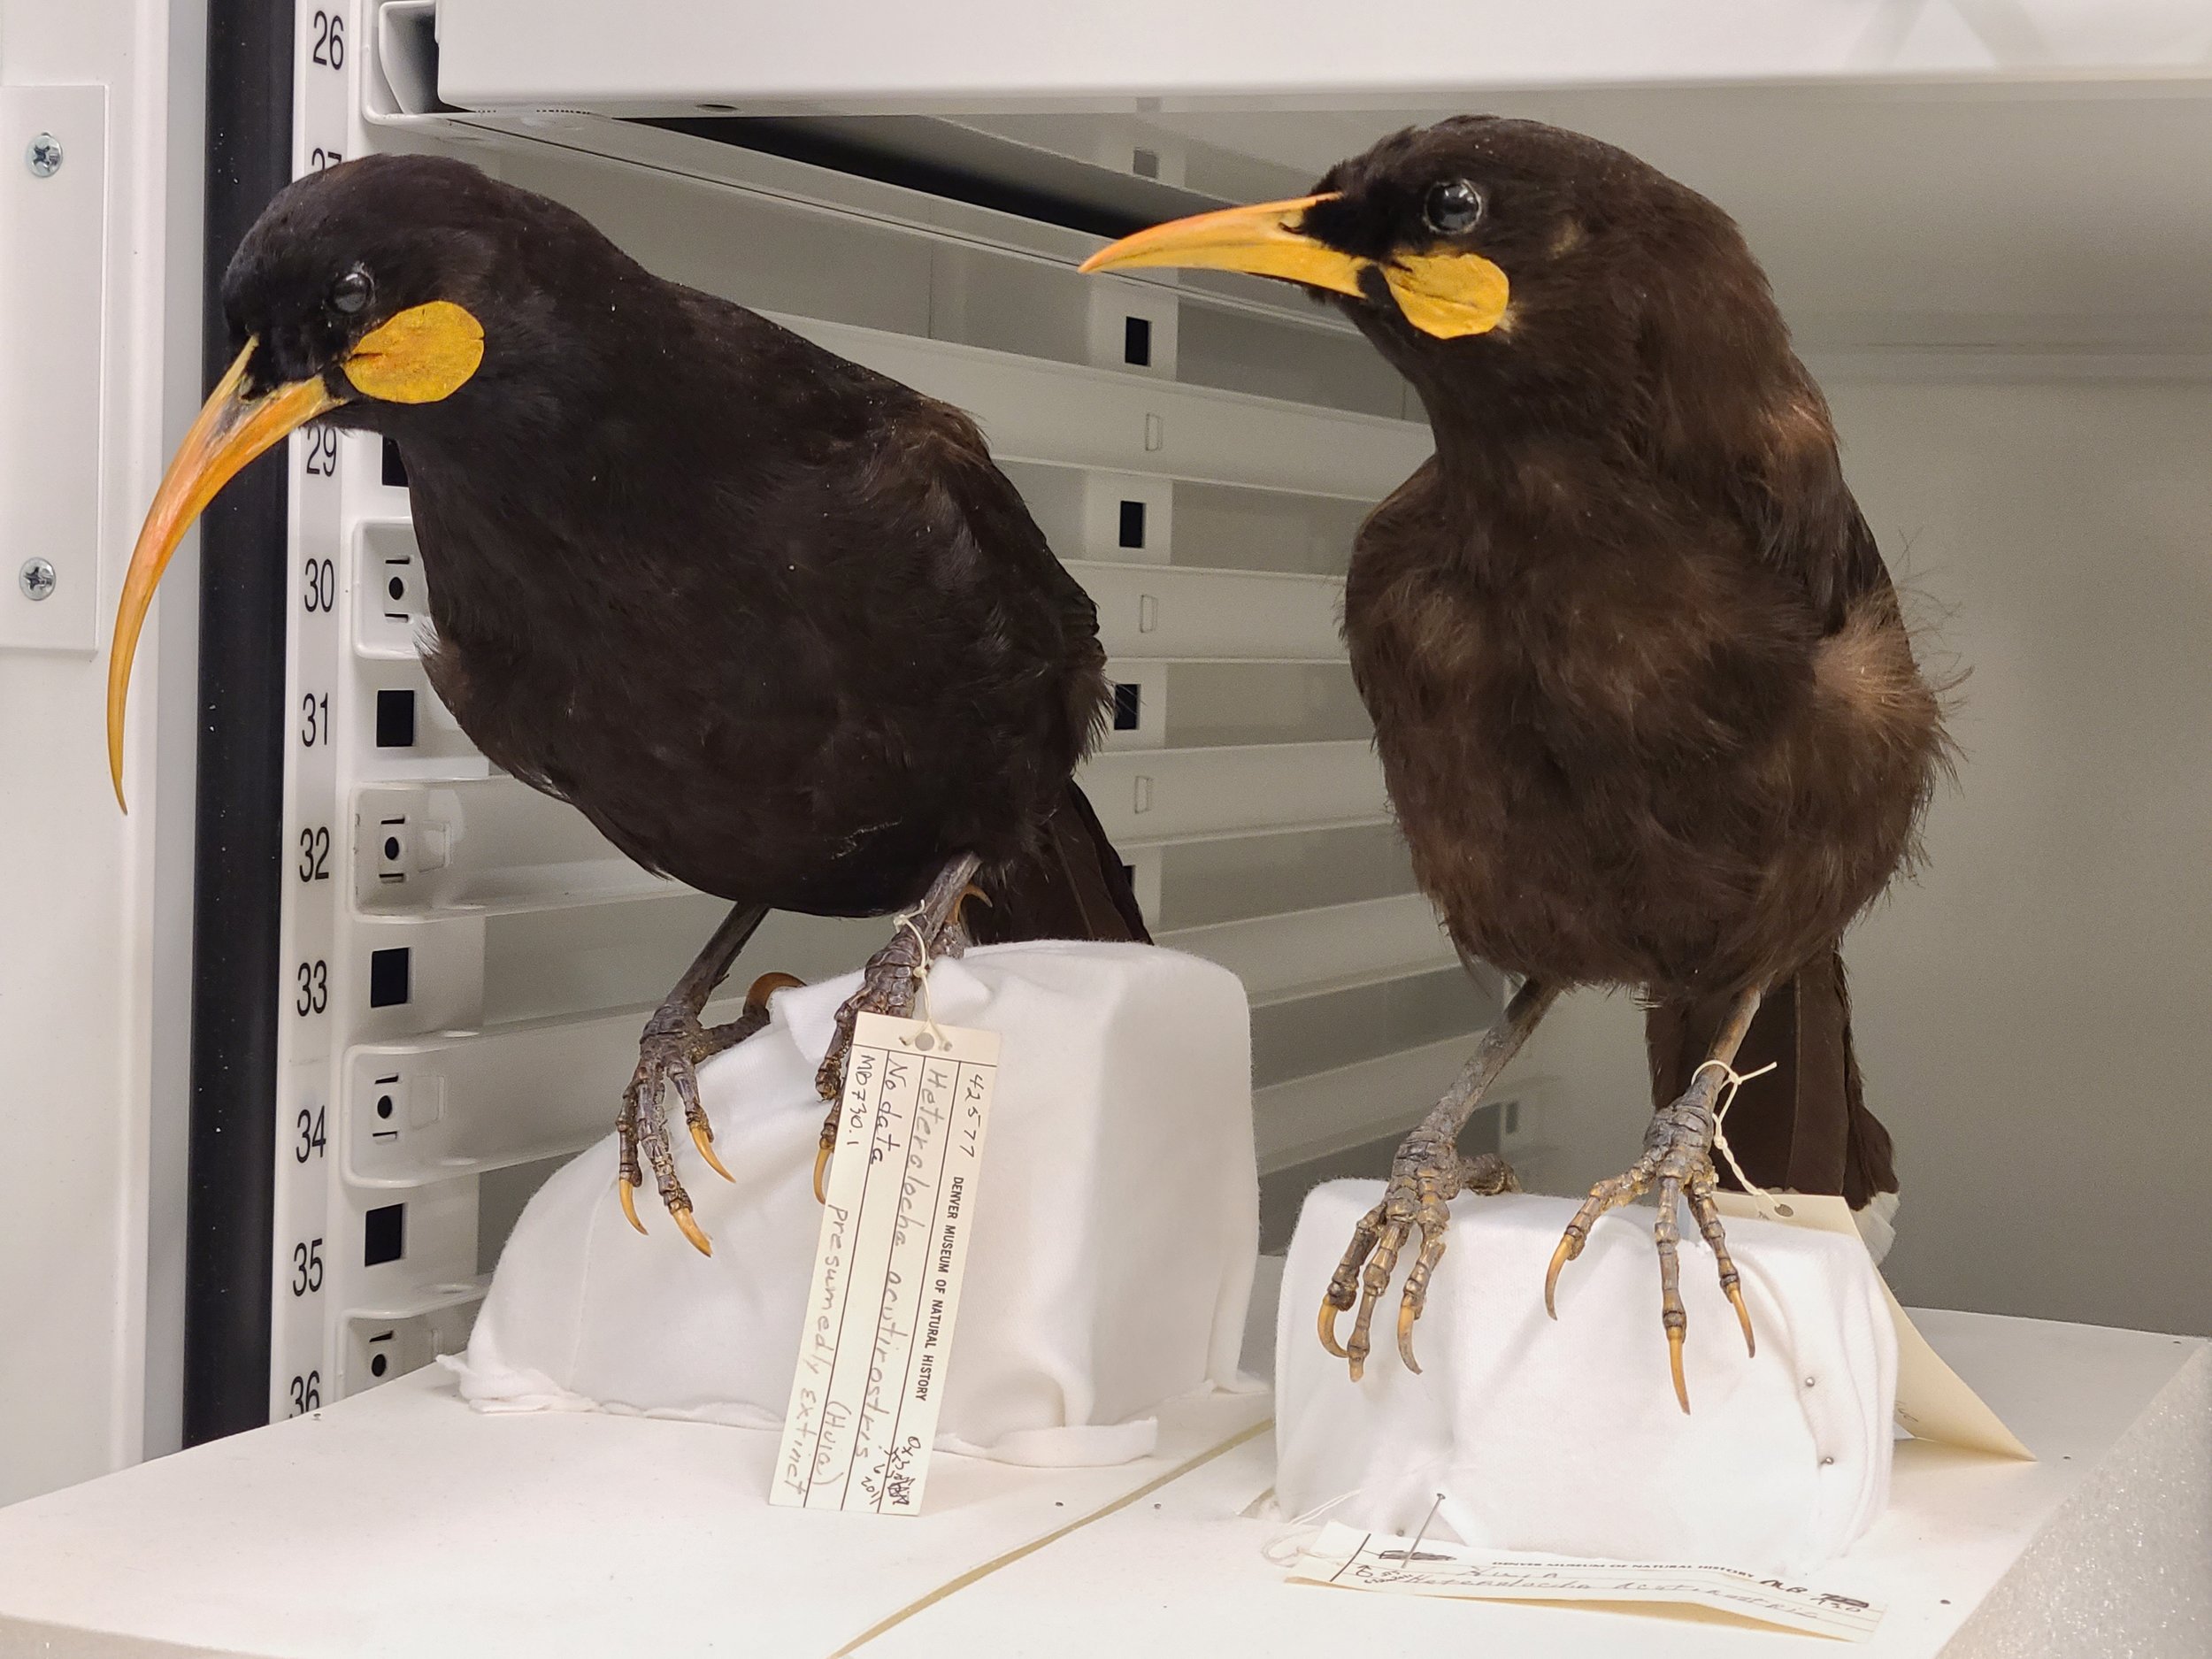  Extinct New Zealand Huia pair. The females had significantly longer and more curved bills than the males. Photo by Megan Jones Patterson.  